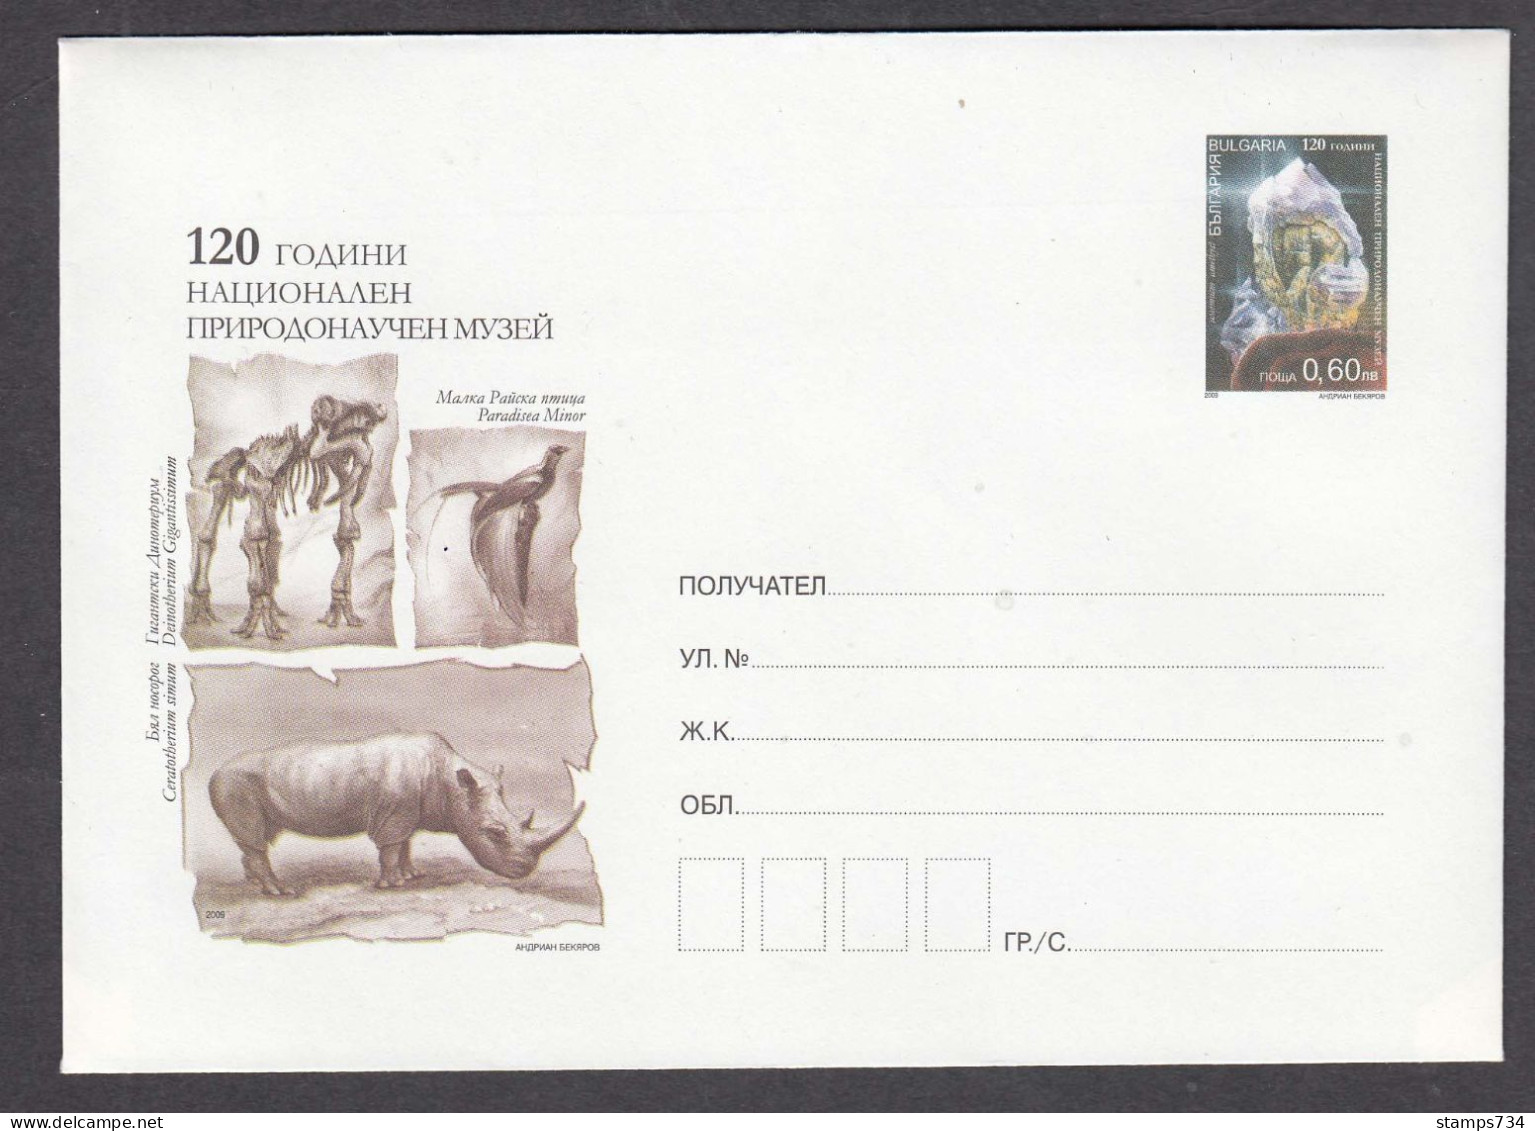 PS 1398/2009 - Mint, 120 Years Of The National Natural History Museum, Mineral, Post. Stationery - Bulgaria - Briefe